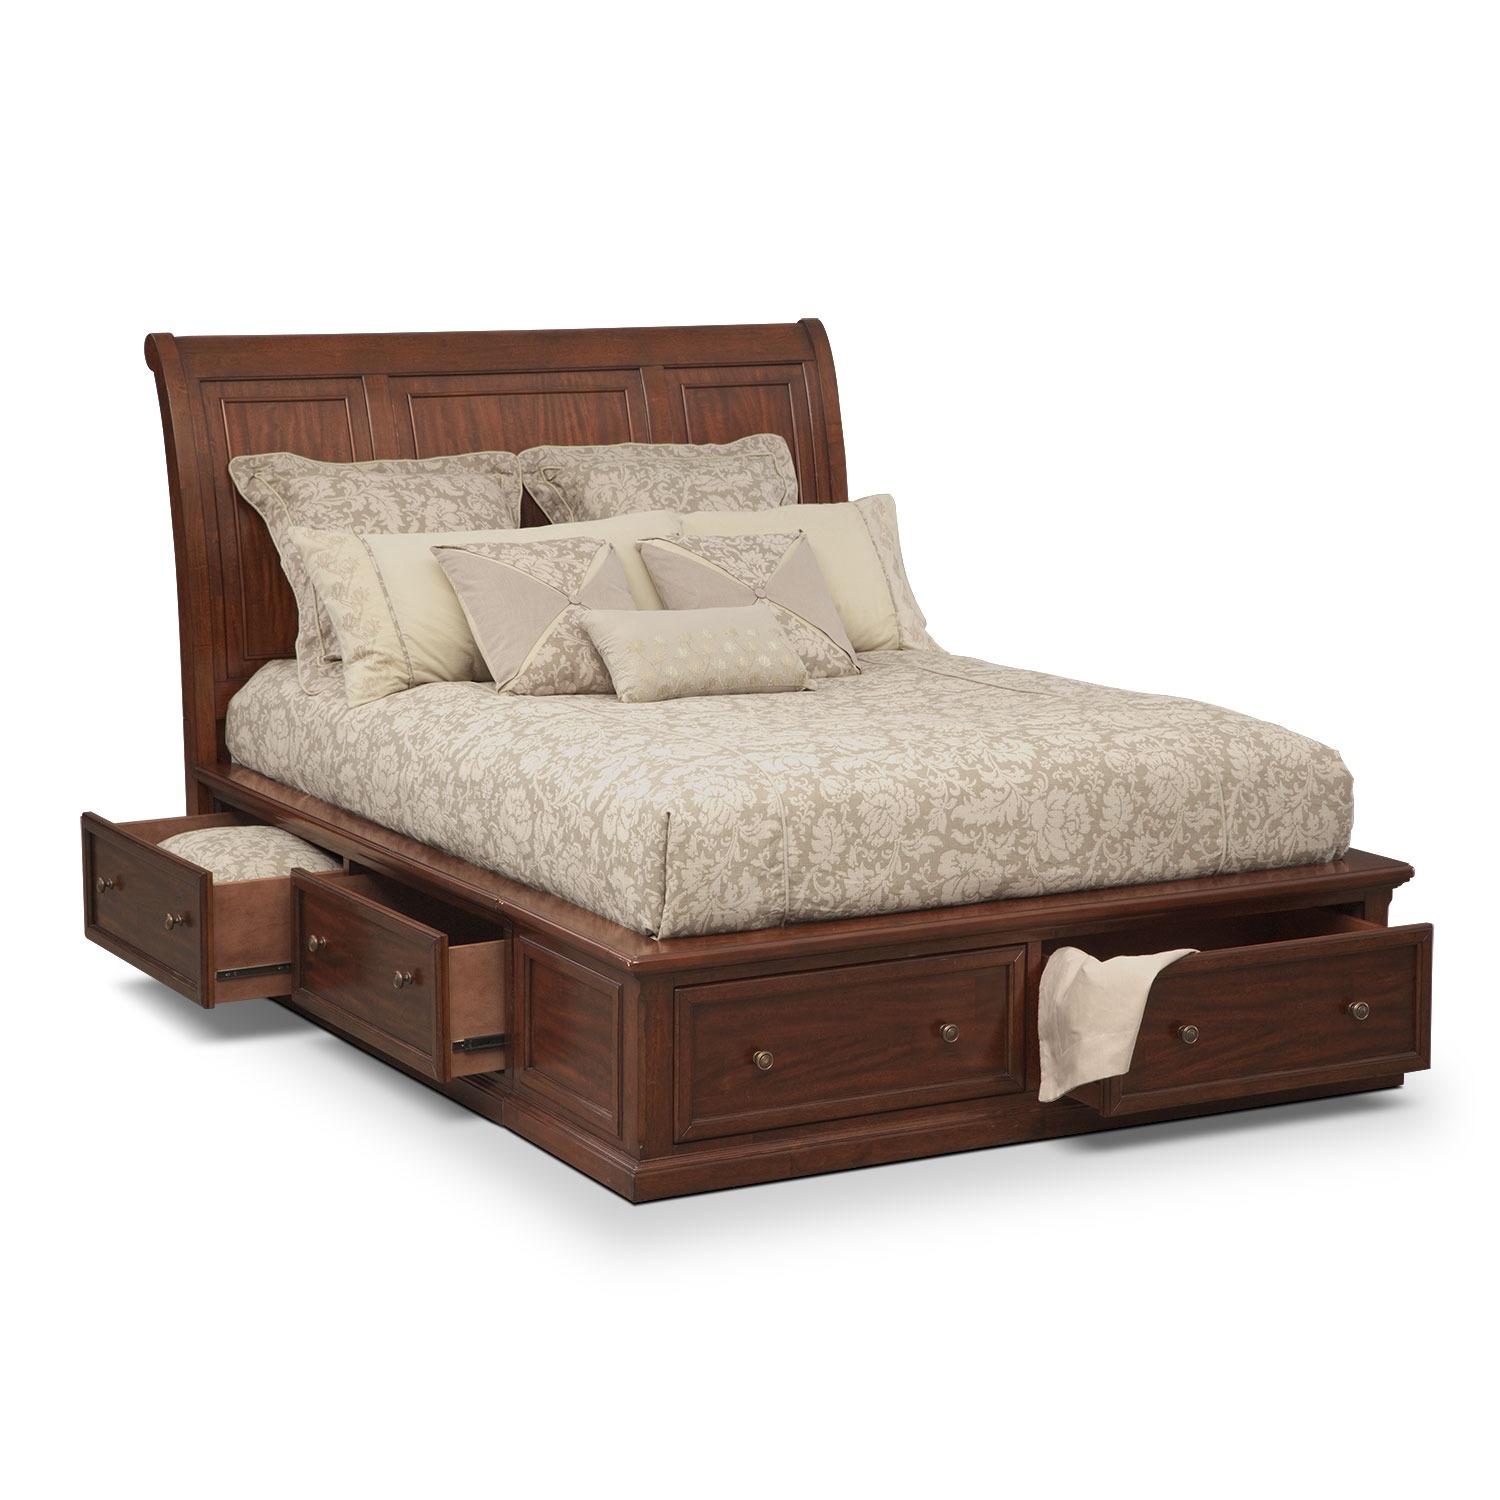 King size bed Hanover King size bed with storage box - cherry RPBYFKD